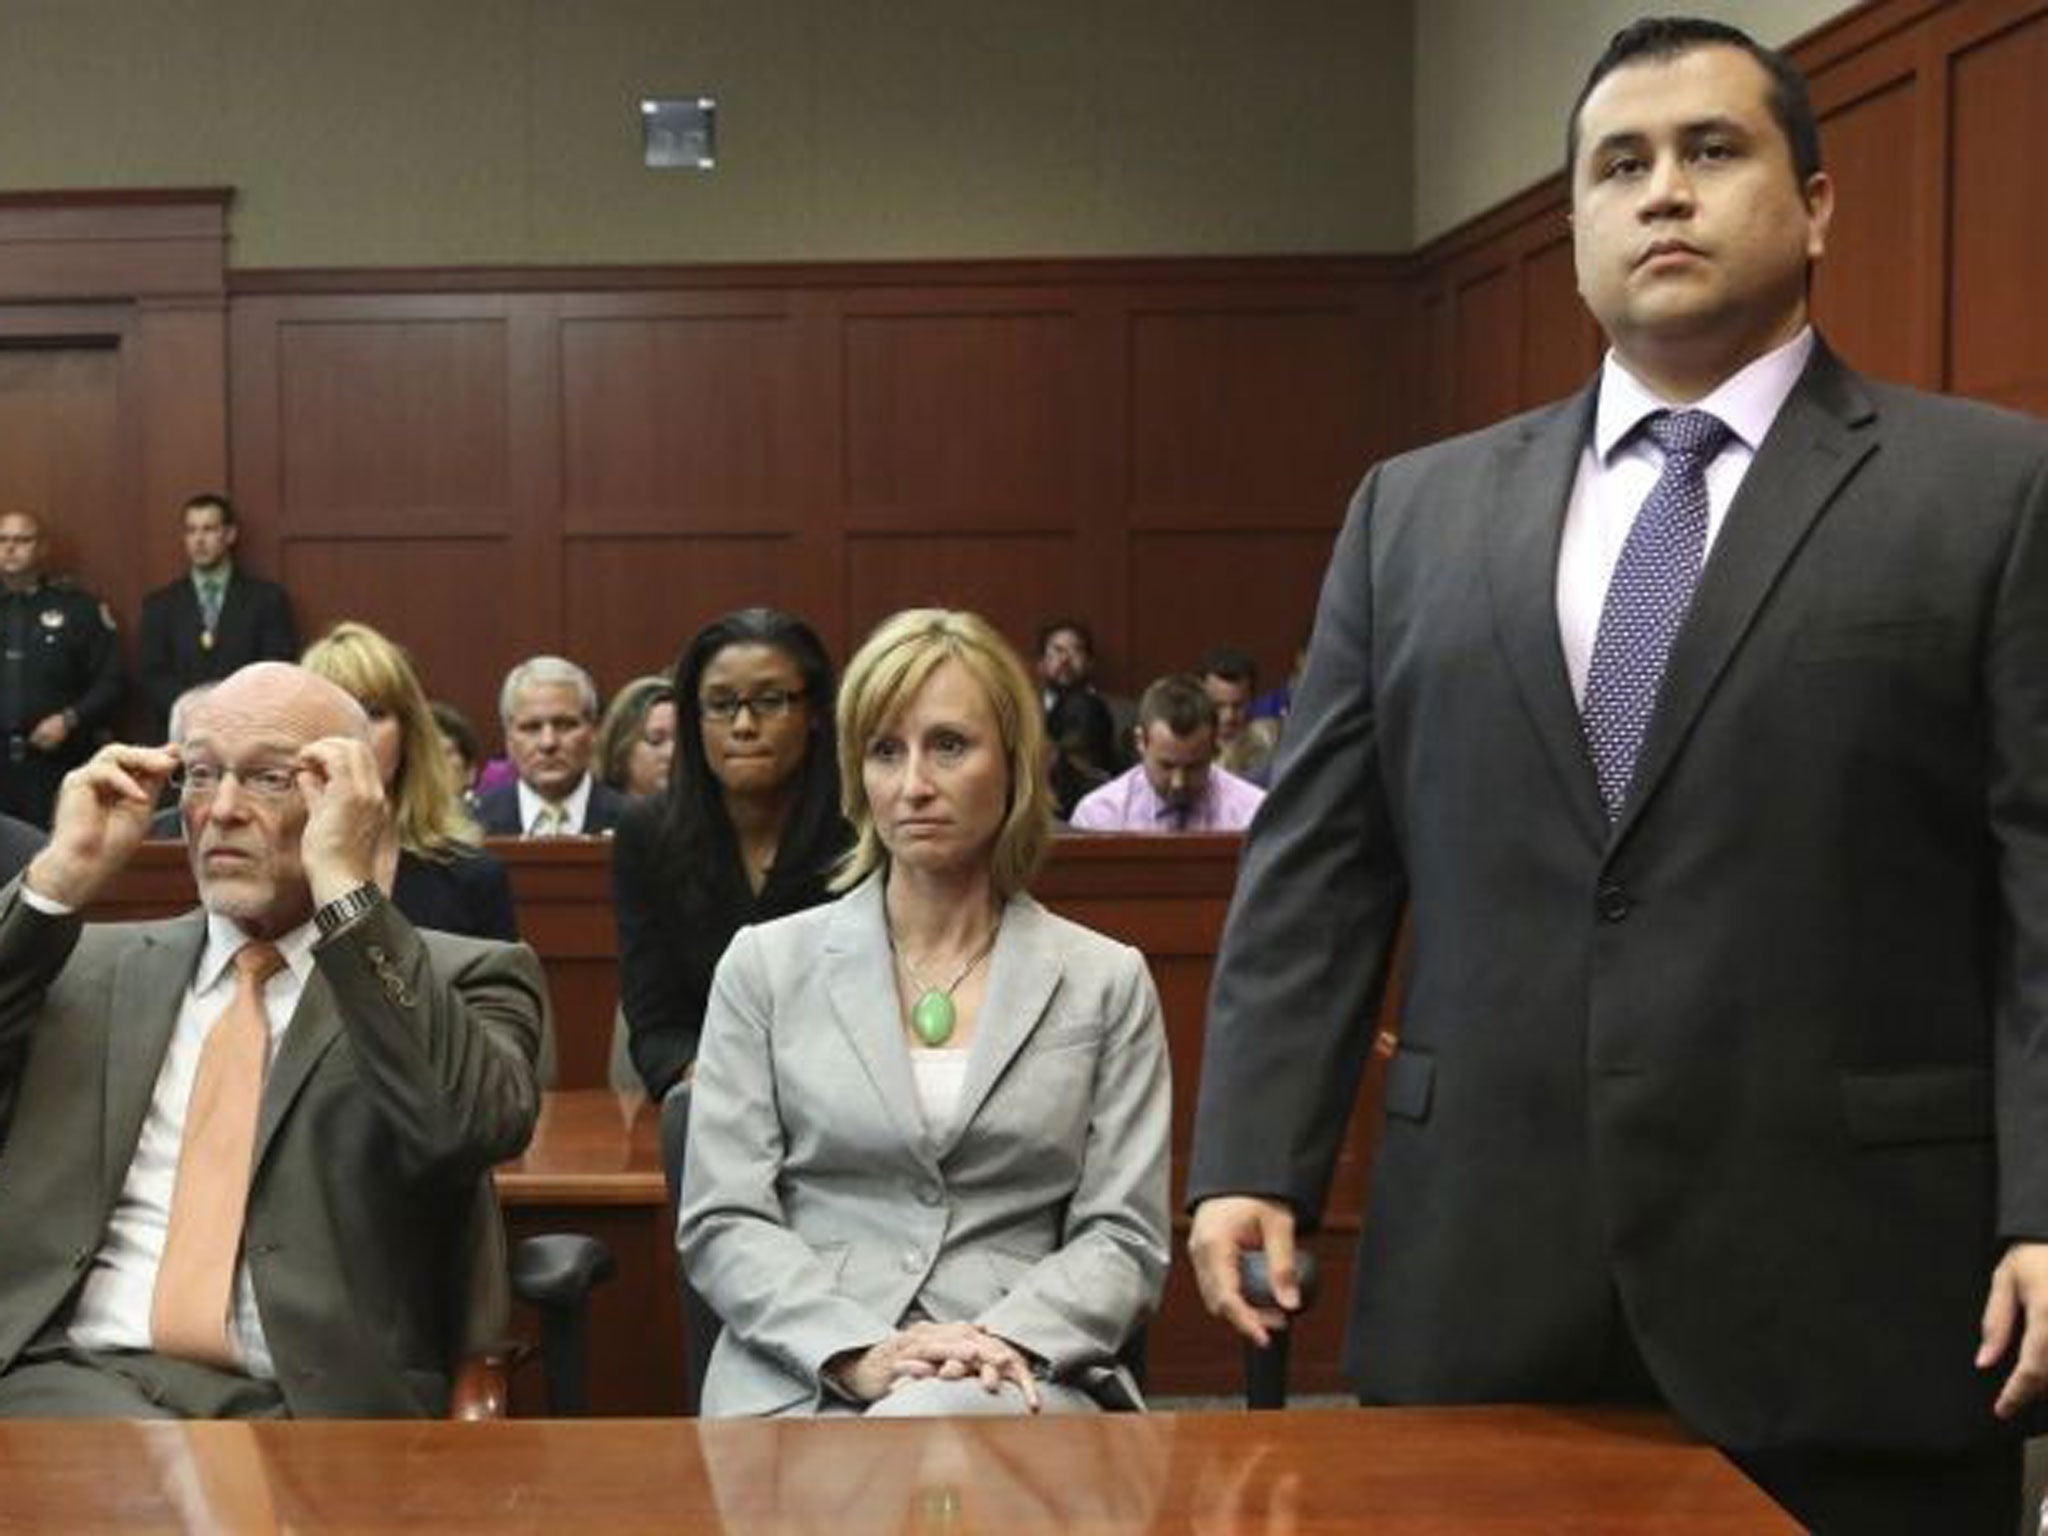 George Zimmerman stands when the jury arrives to deliver the verdict 